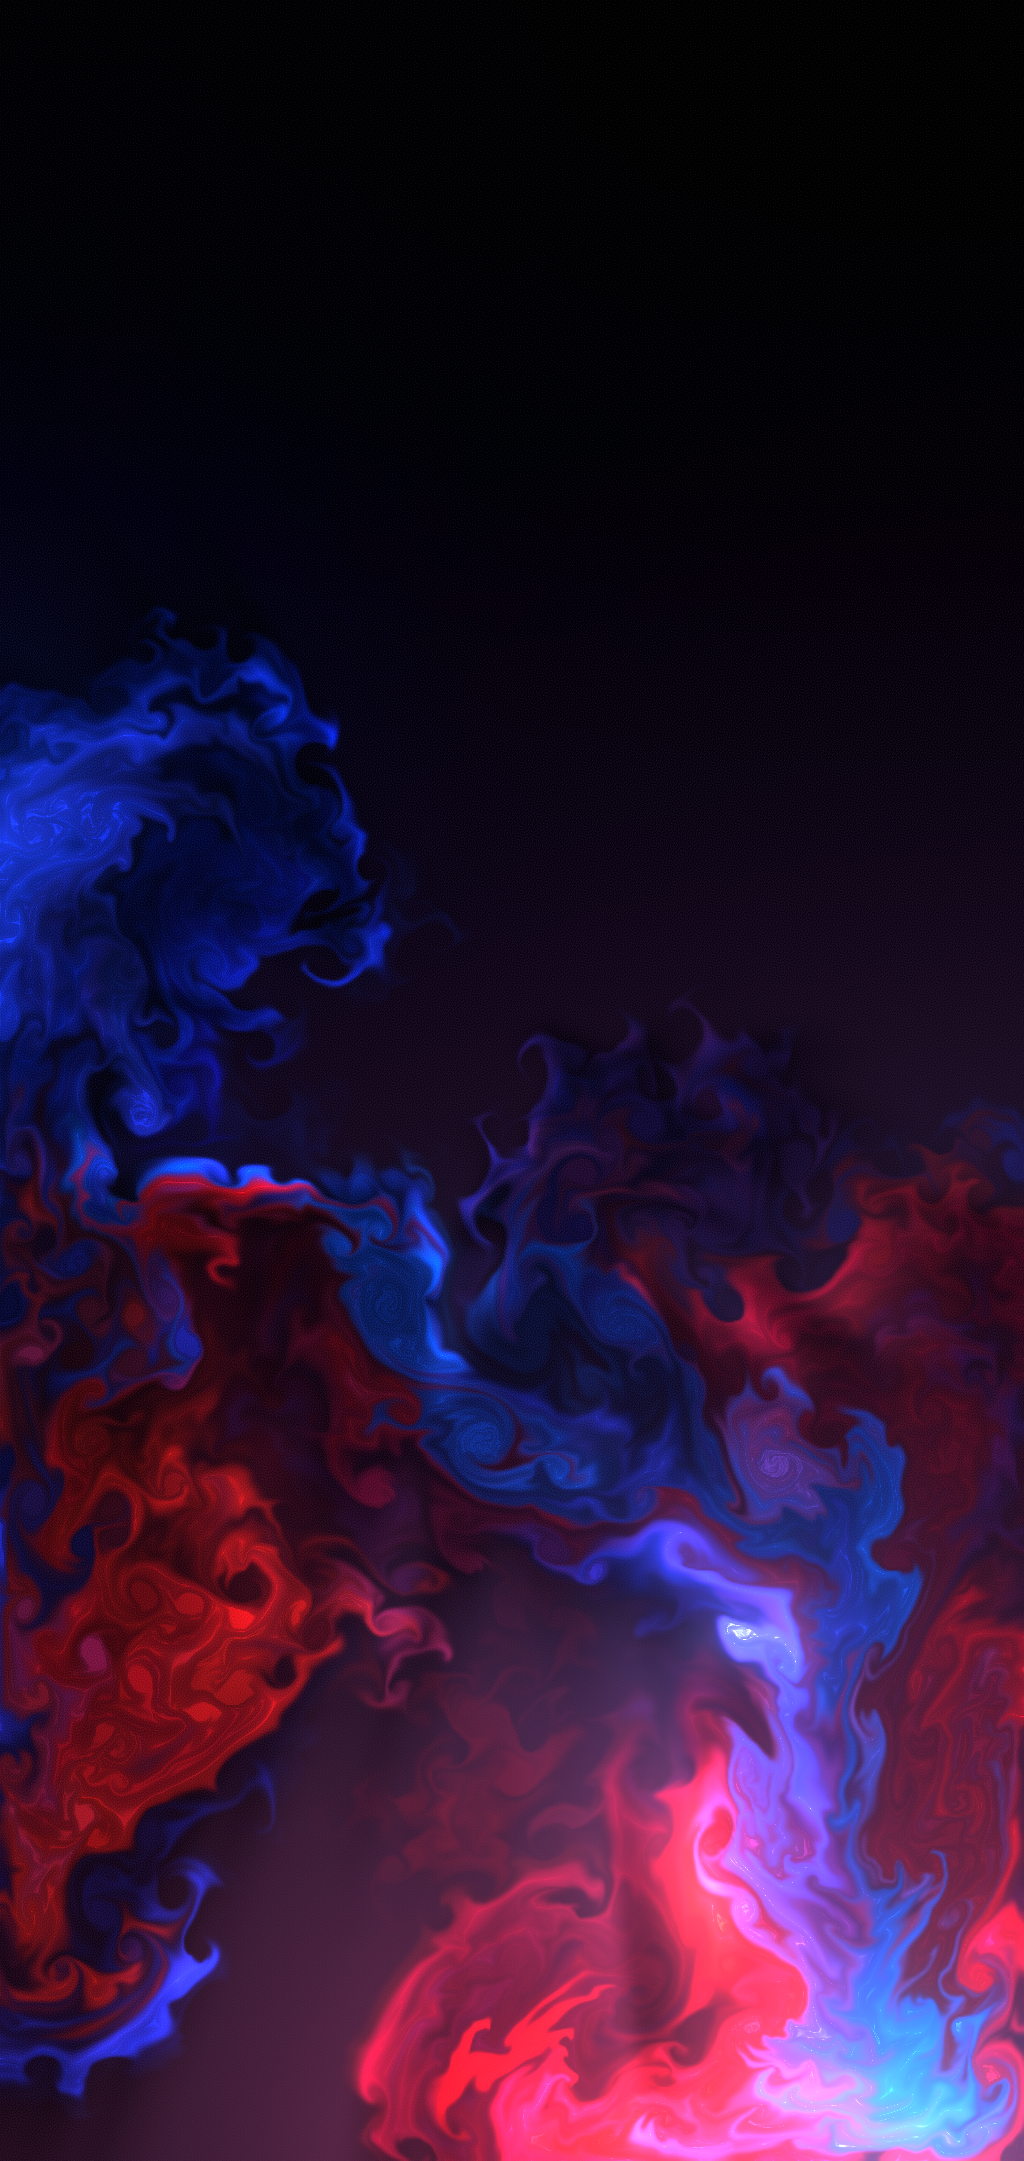 OLED wallpaper red and blue abstract made in fluid simulator